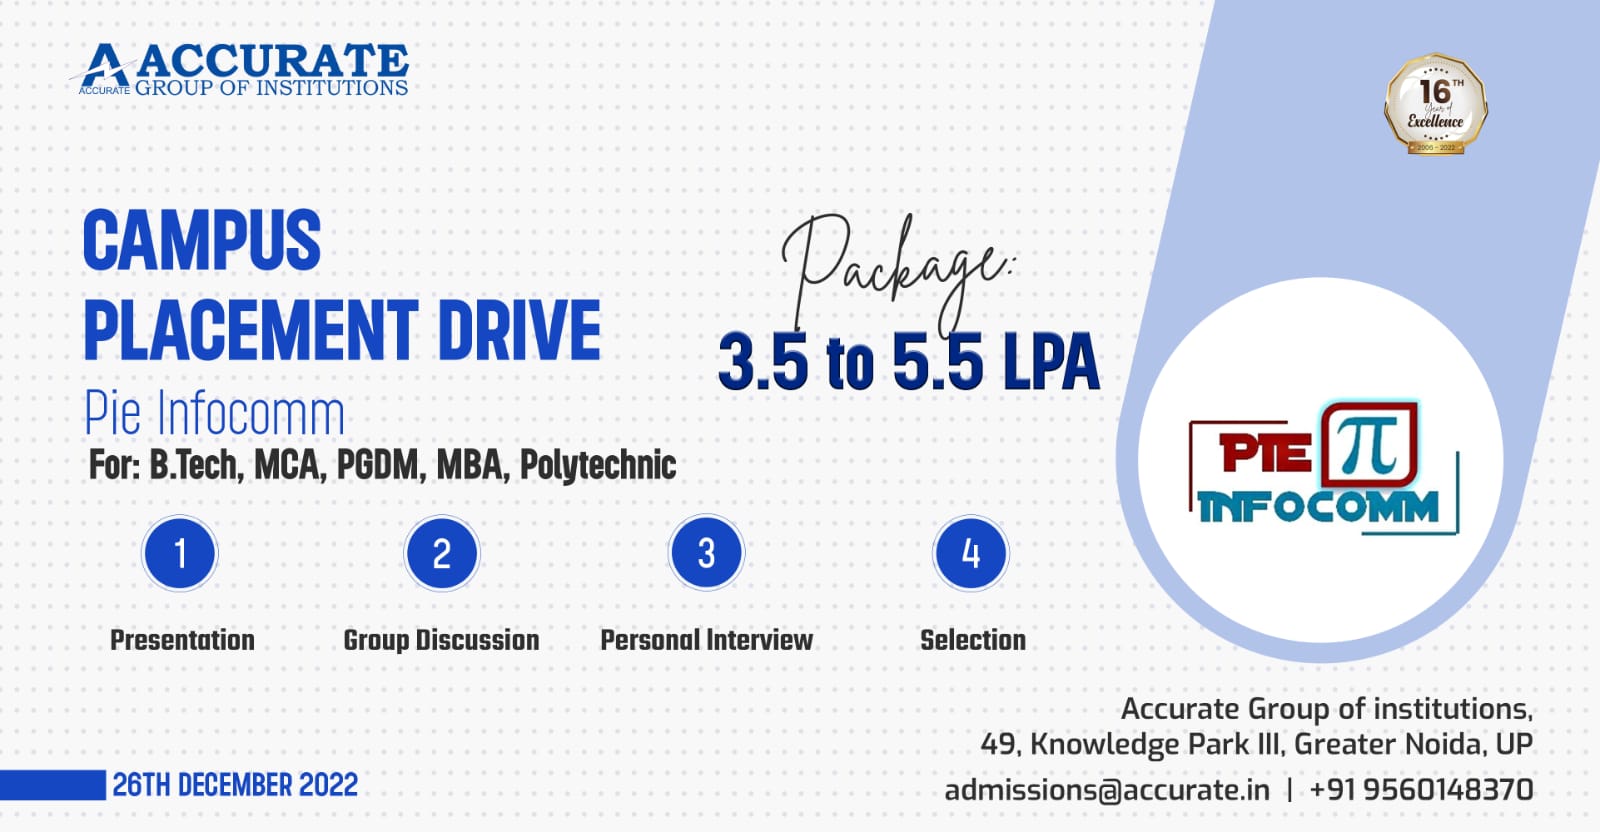 Campus Placement Drive for BTech, MCA, PGDM, MBA and Polytechnic Students